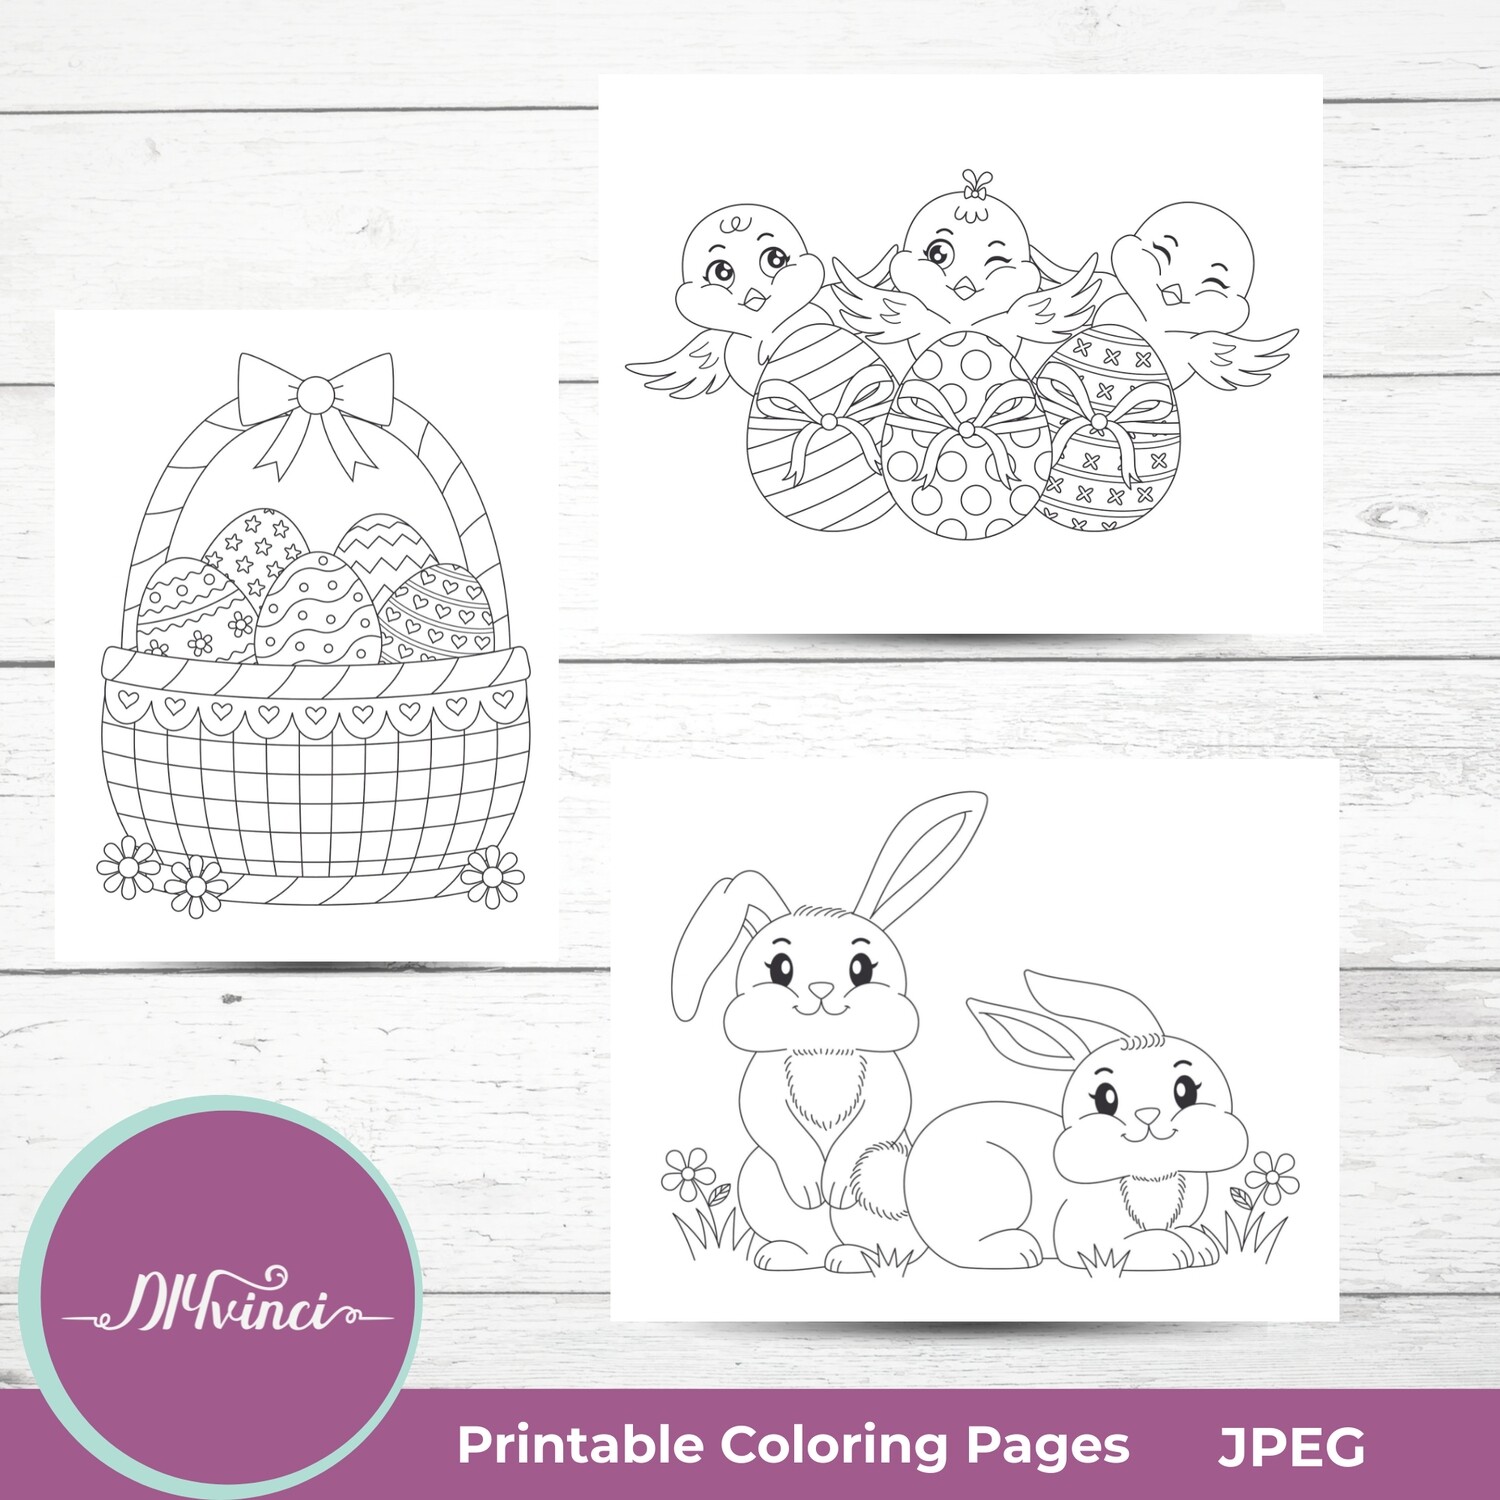 3 Printable Cute Easter Coloring Pages - JPEG - Personal & Commercial Use